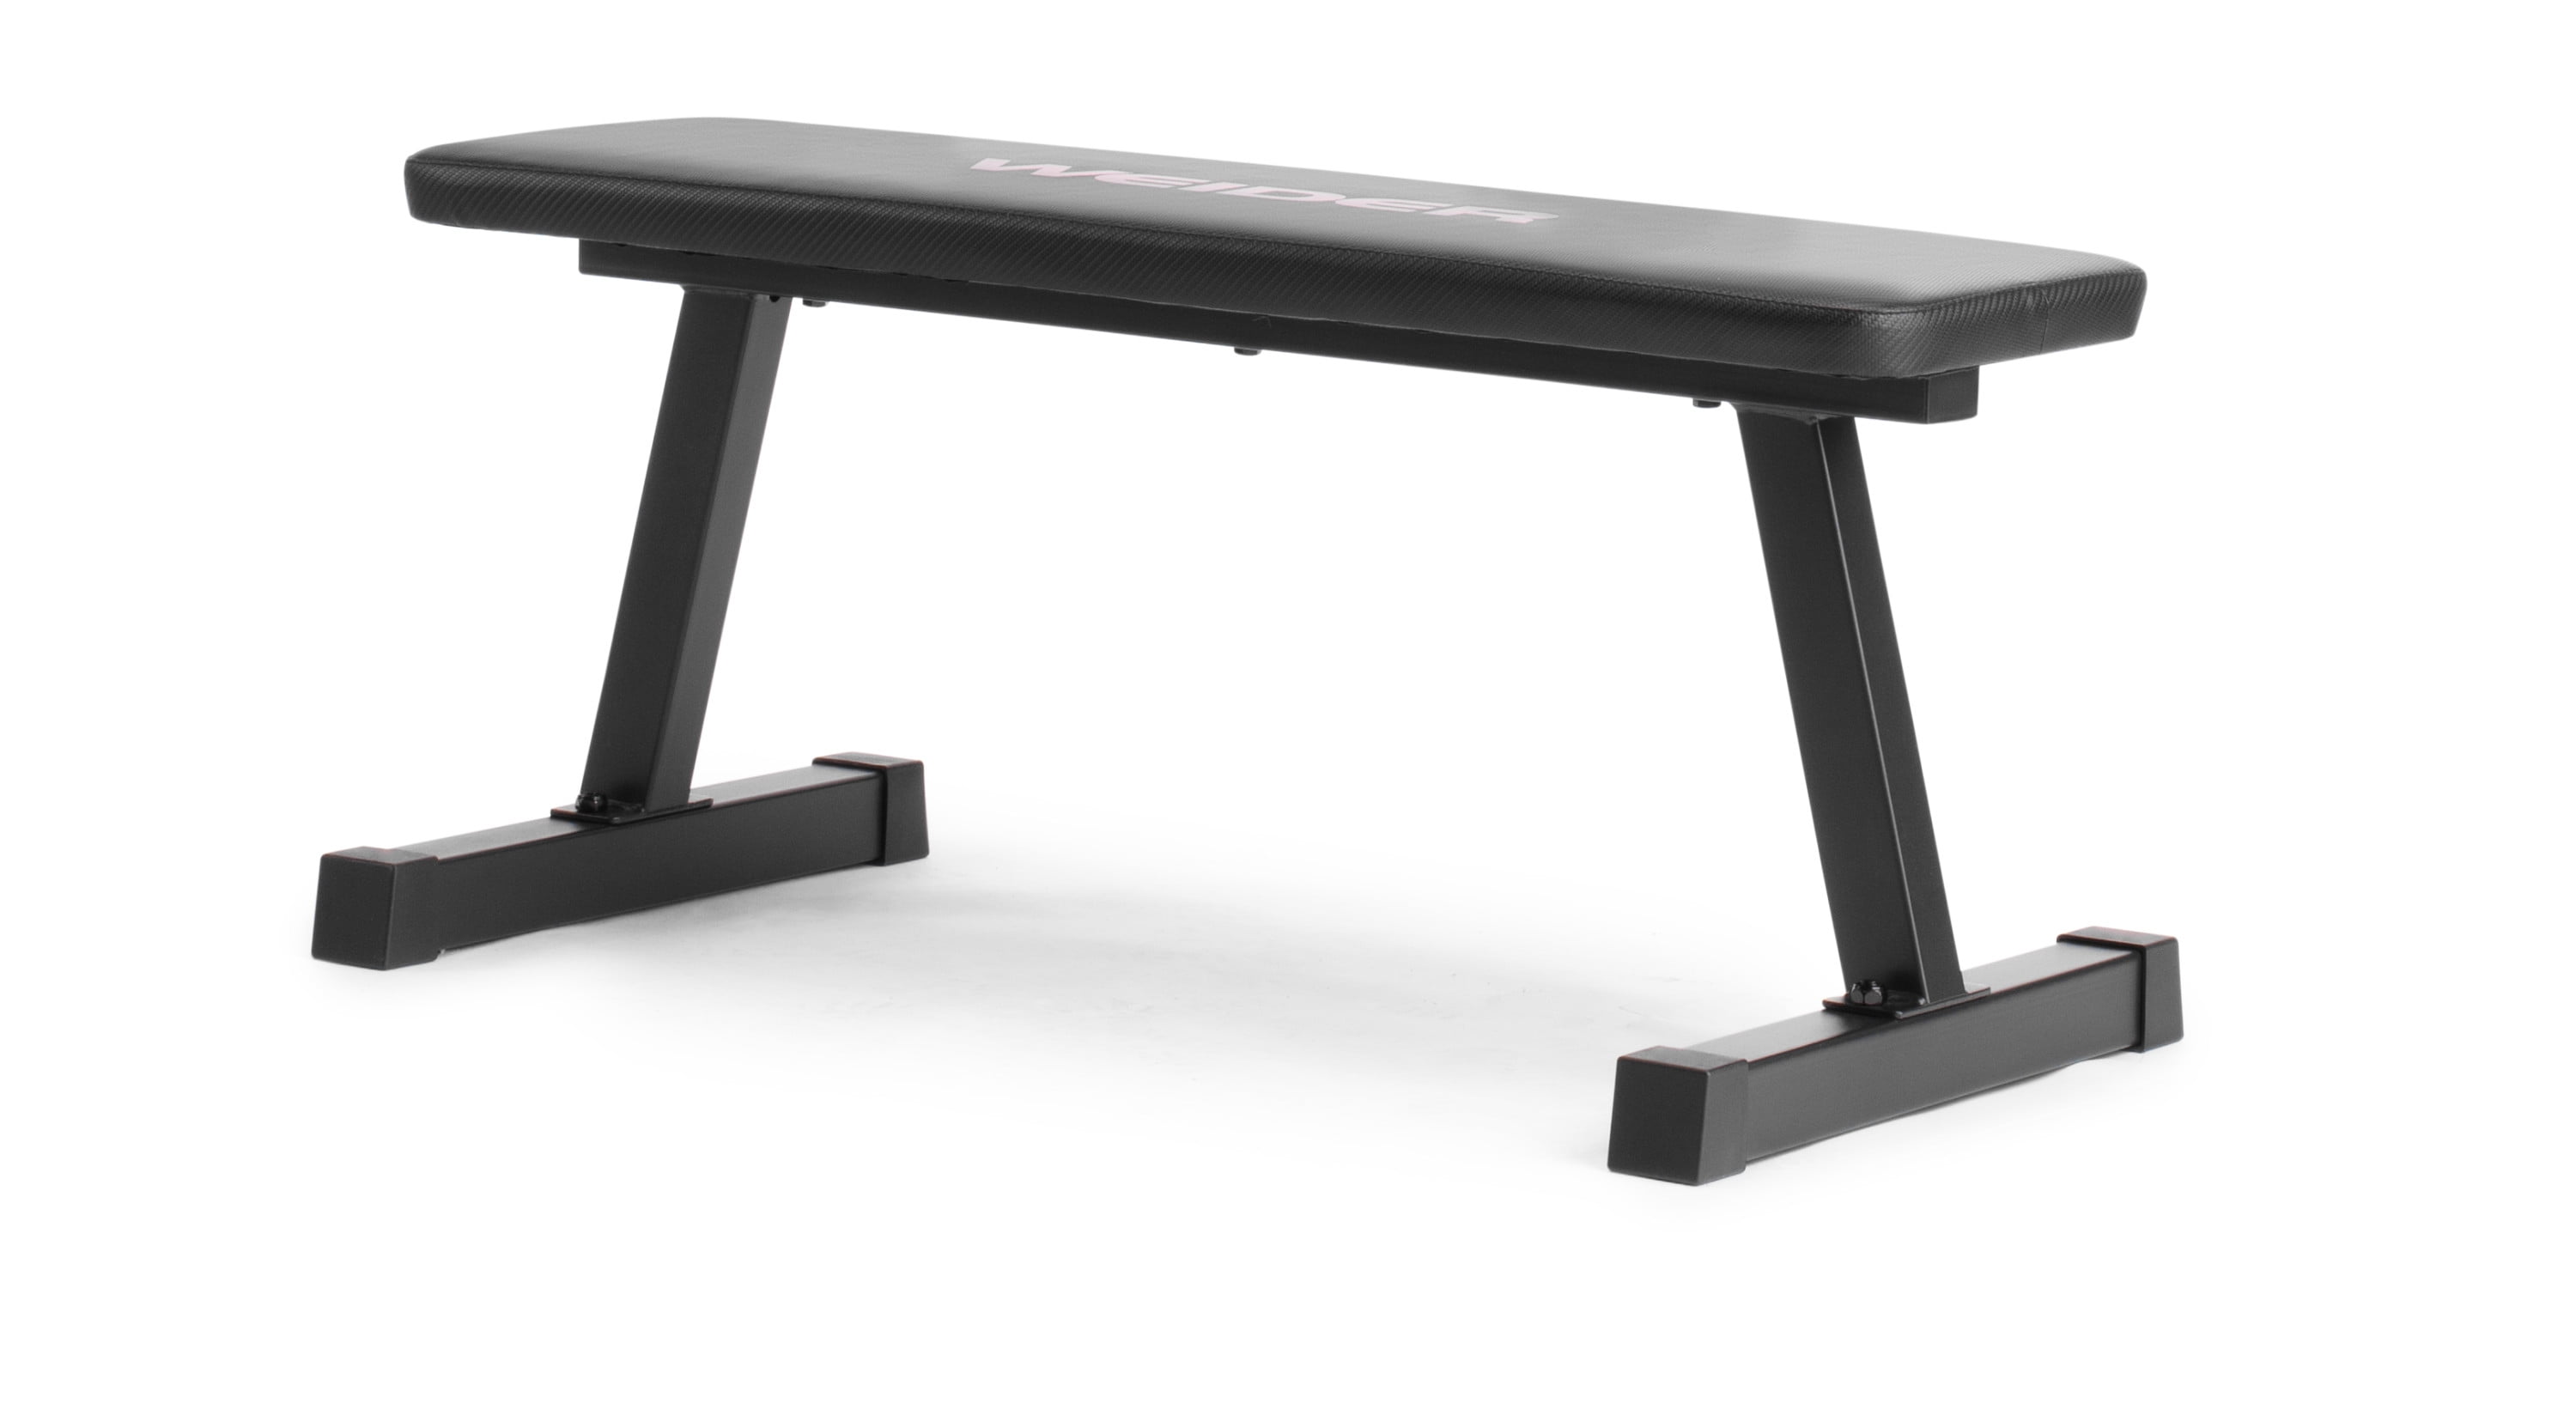 Flat Weight Benches for sale